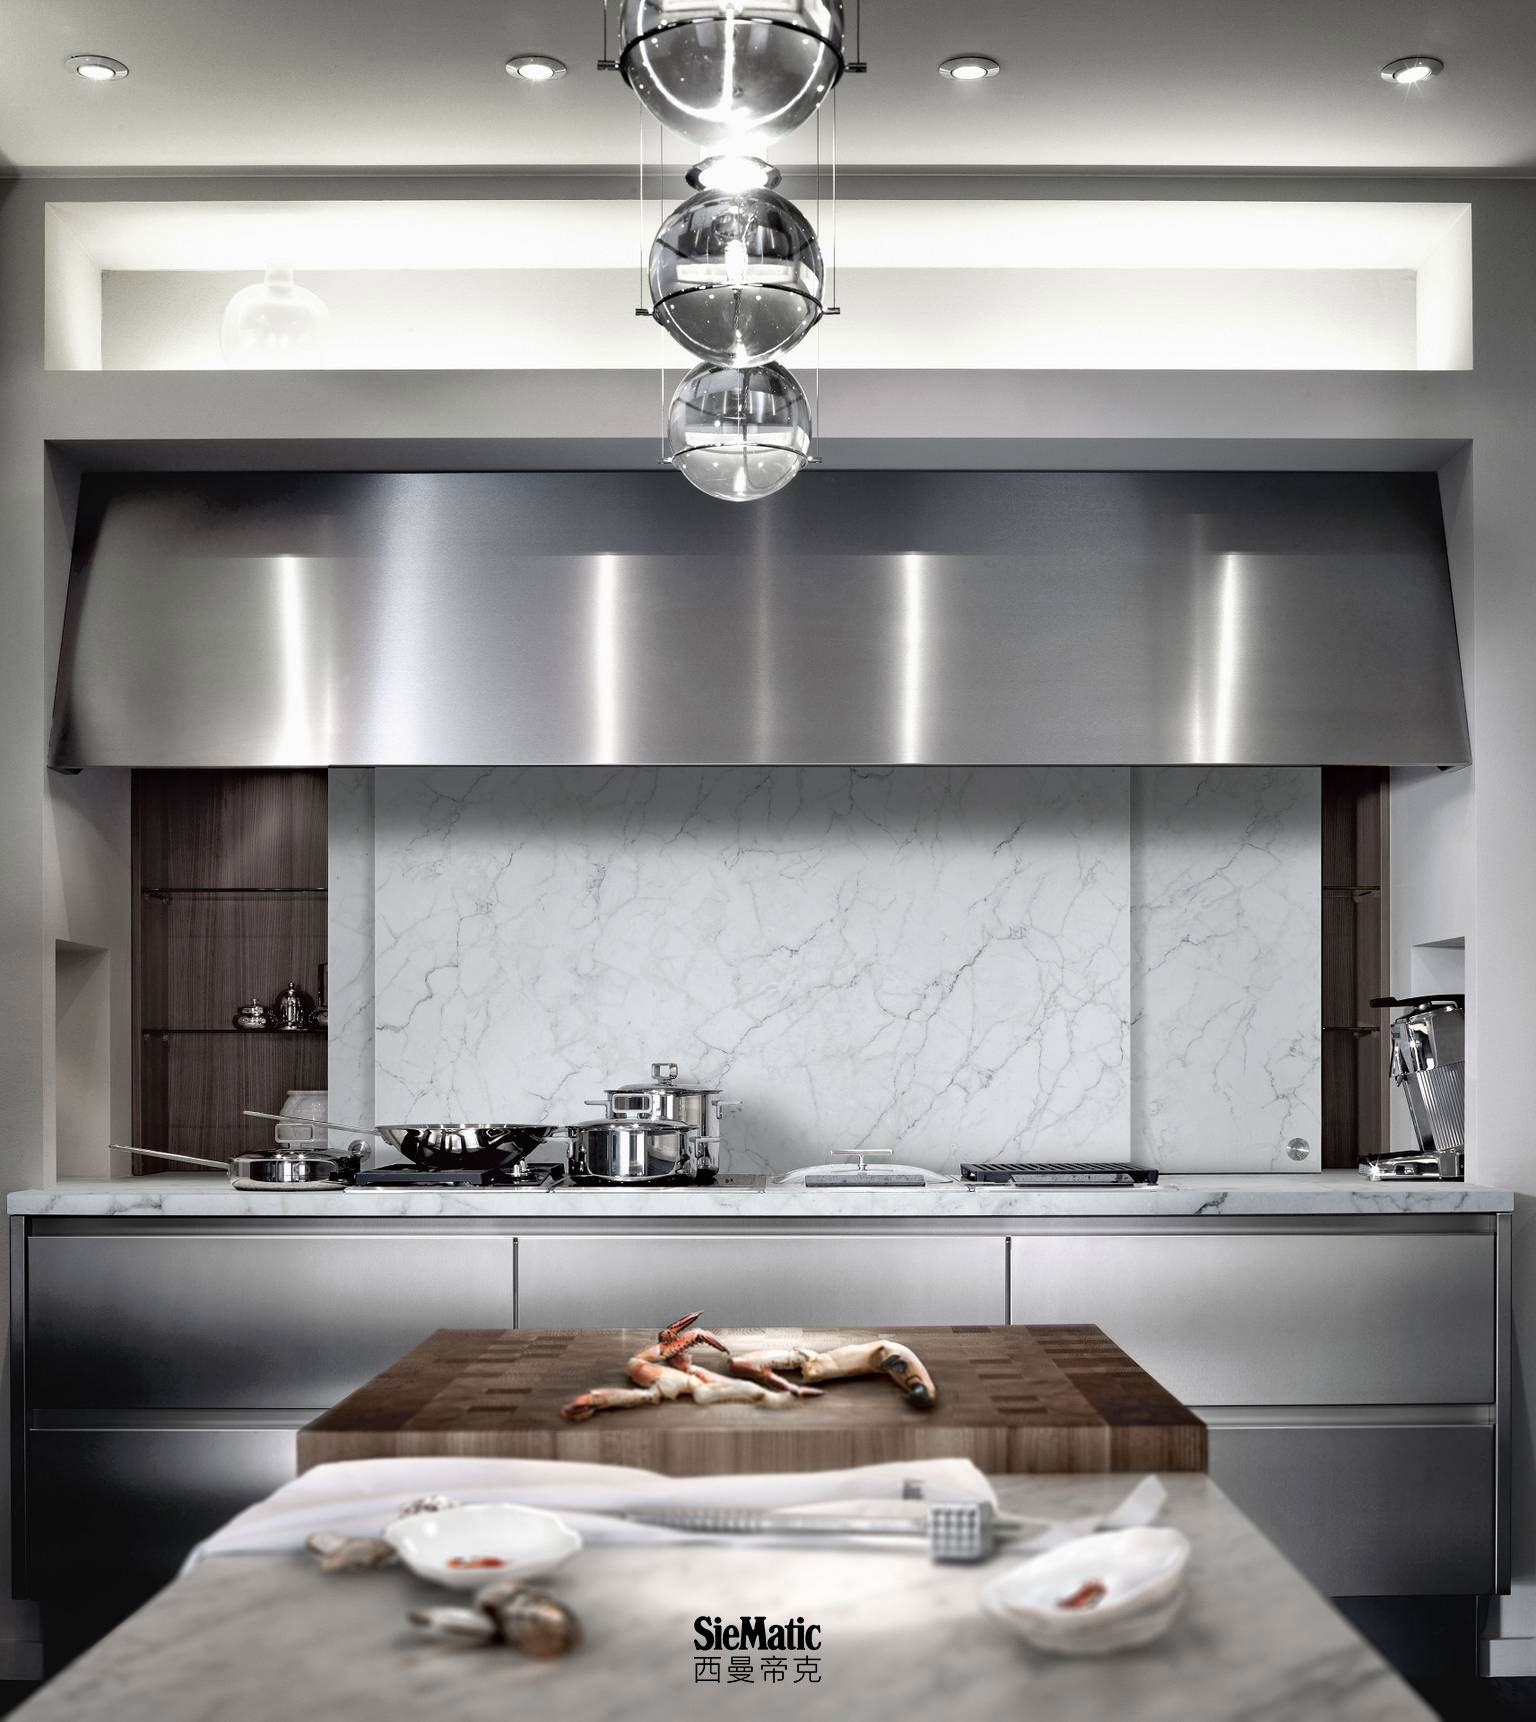 SieMatic BeauxArts from the Classic style collection with countertop and backsplash in bright marble